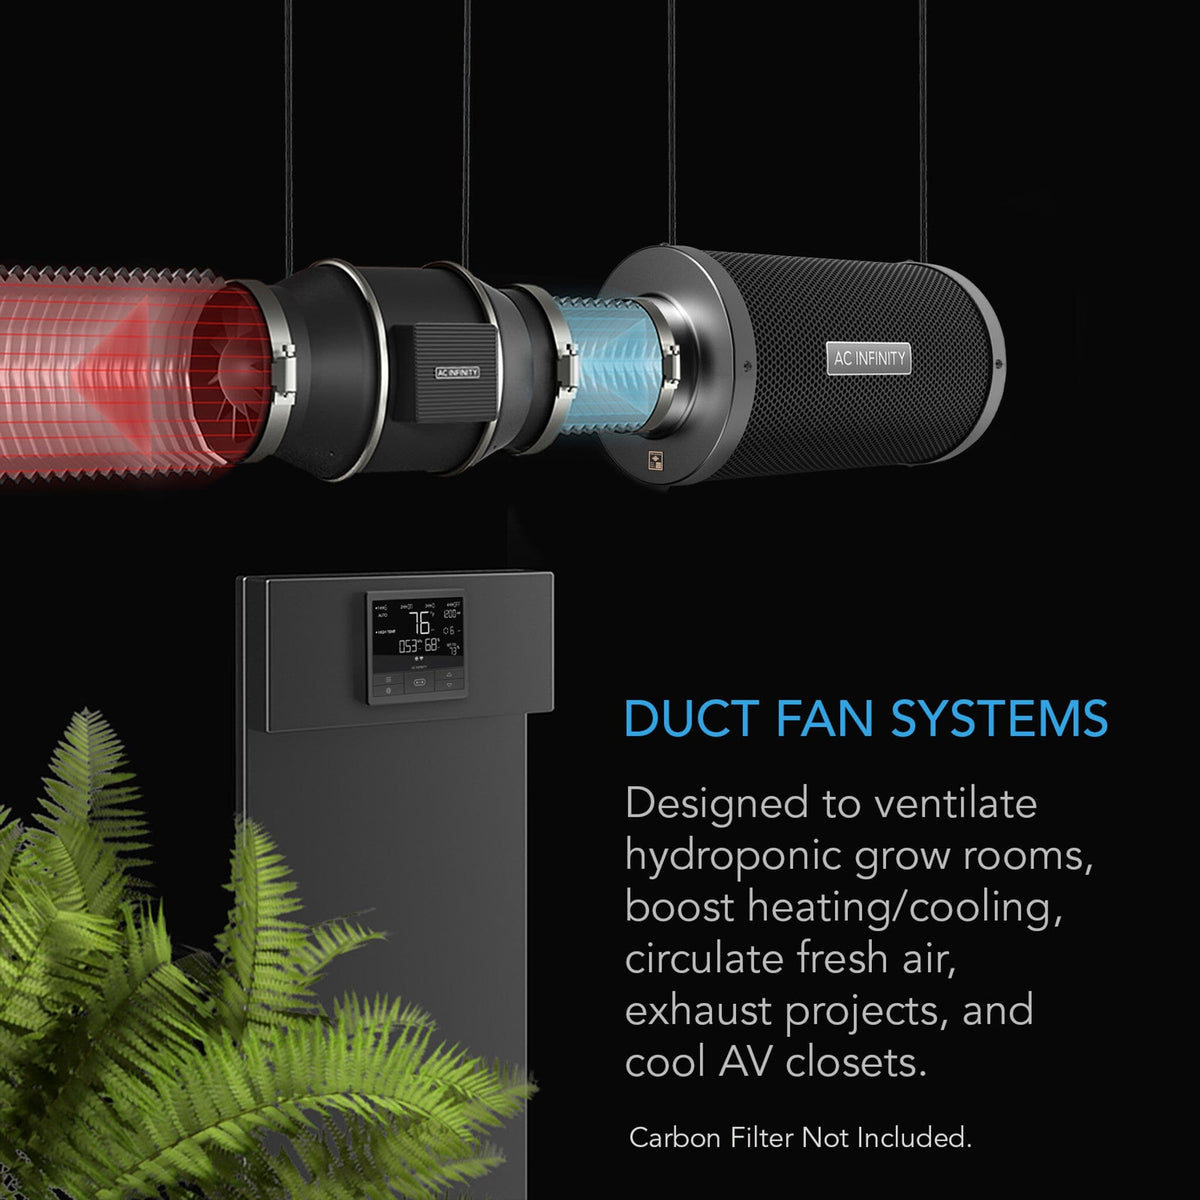 Duct Fan system for ventilation of grow rooms and other ventilation projects